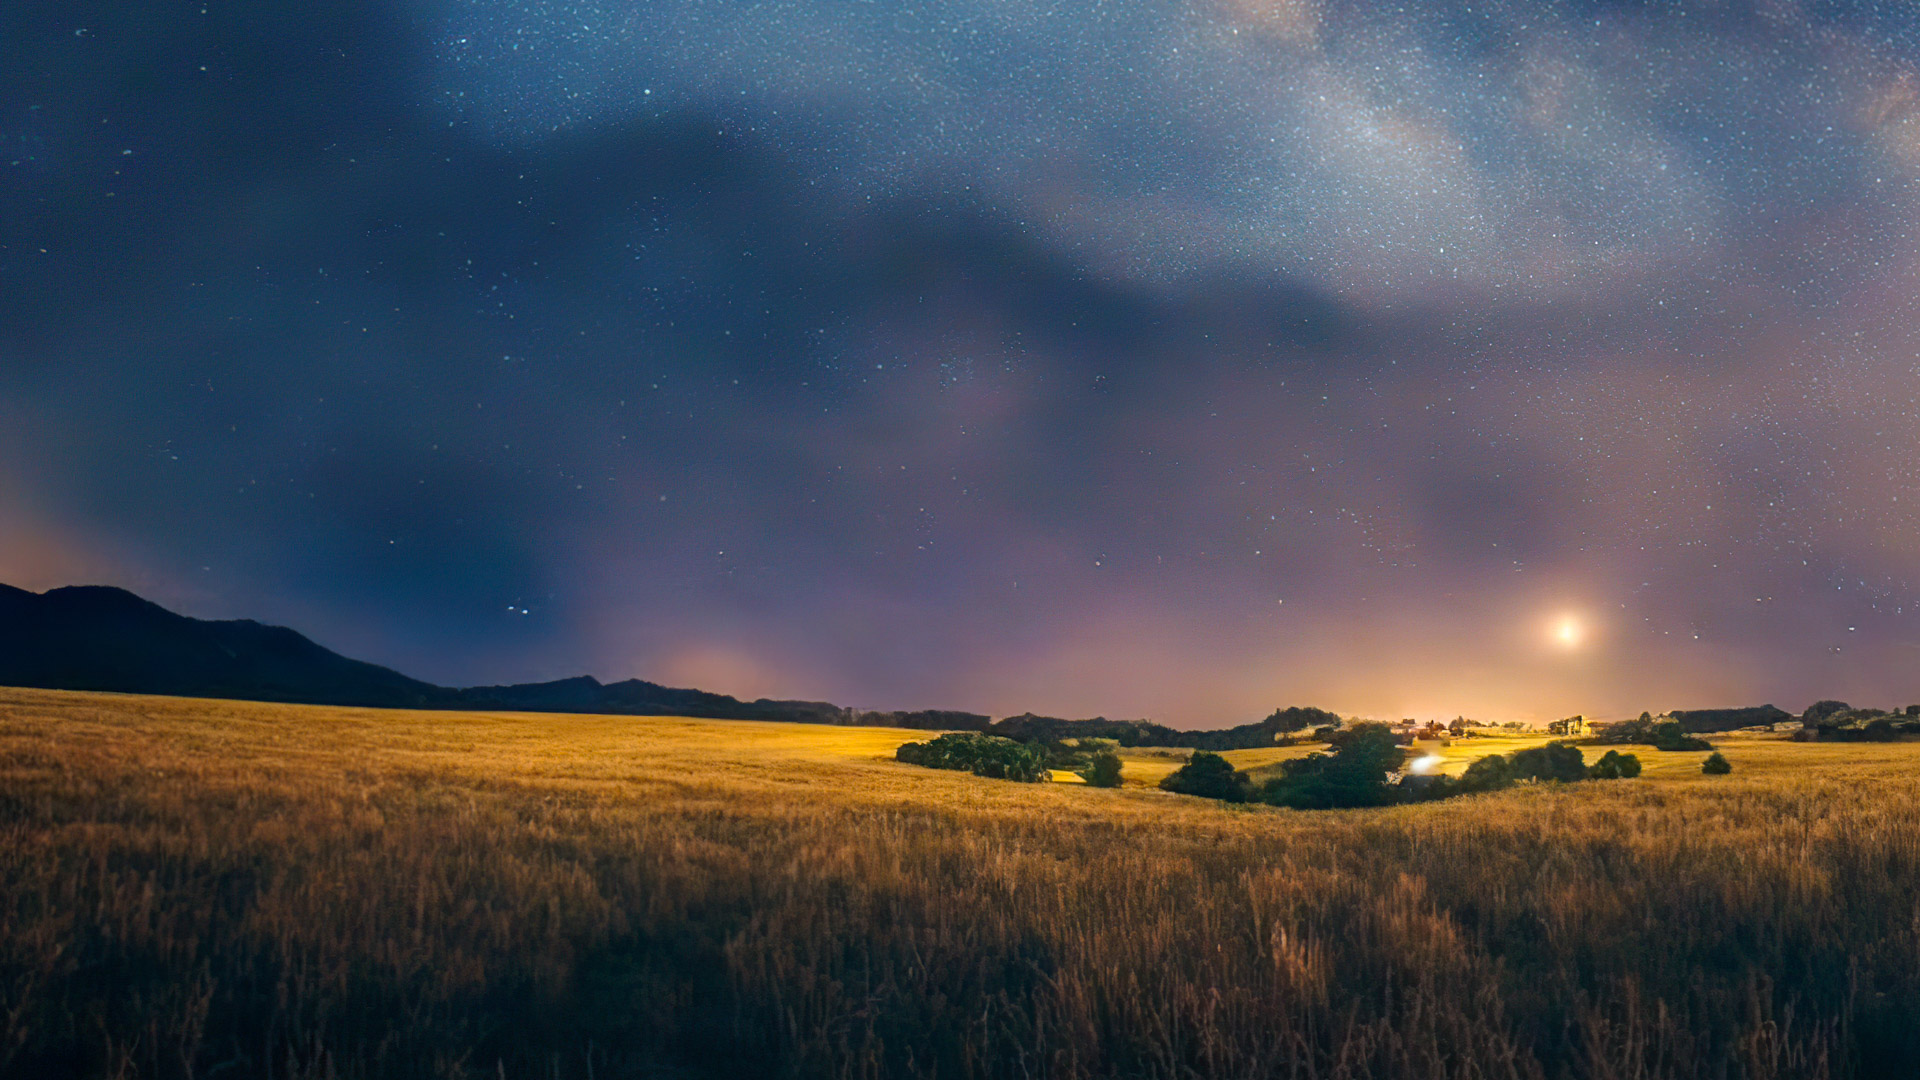 Download HD nature background wallpapers in 1080p, illustrating a clear, starry night sky in the countryside, with the Milky Way stretching across the horizon.